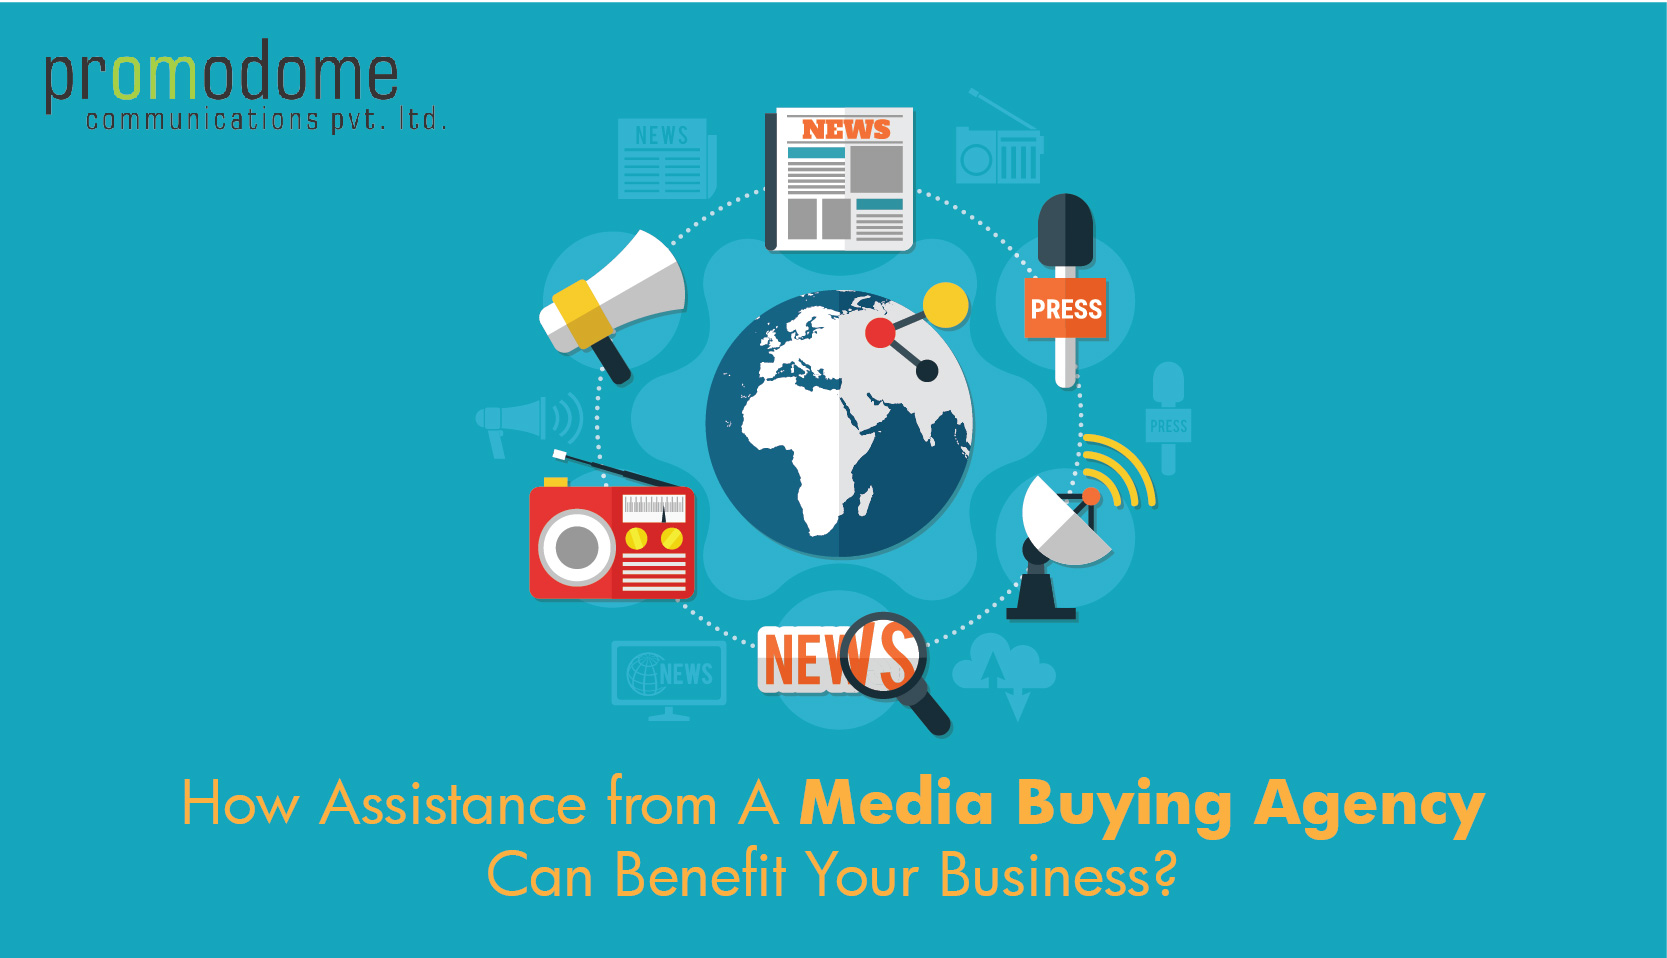 How Assistance from A Media Buying Agency Can Benefit Your Business?